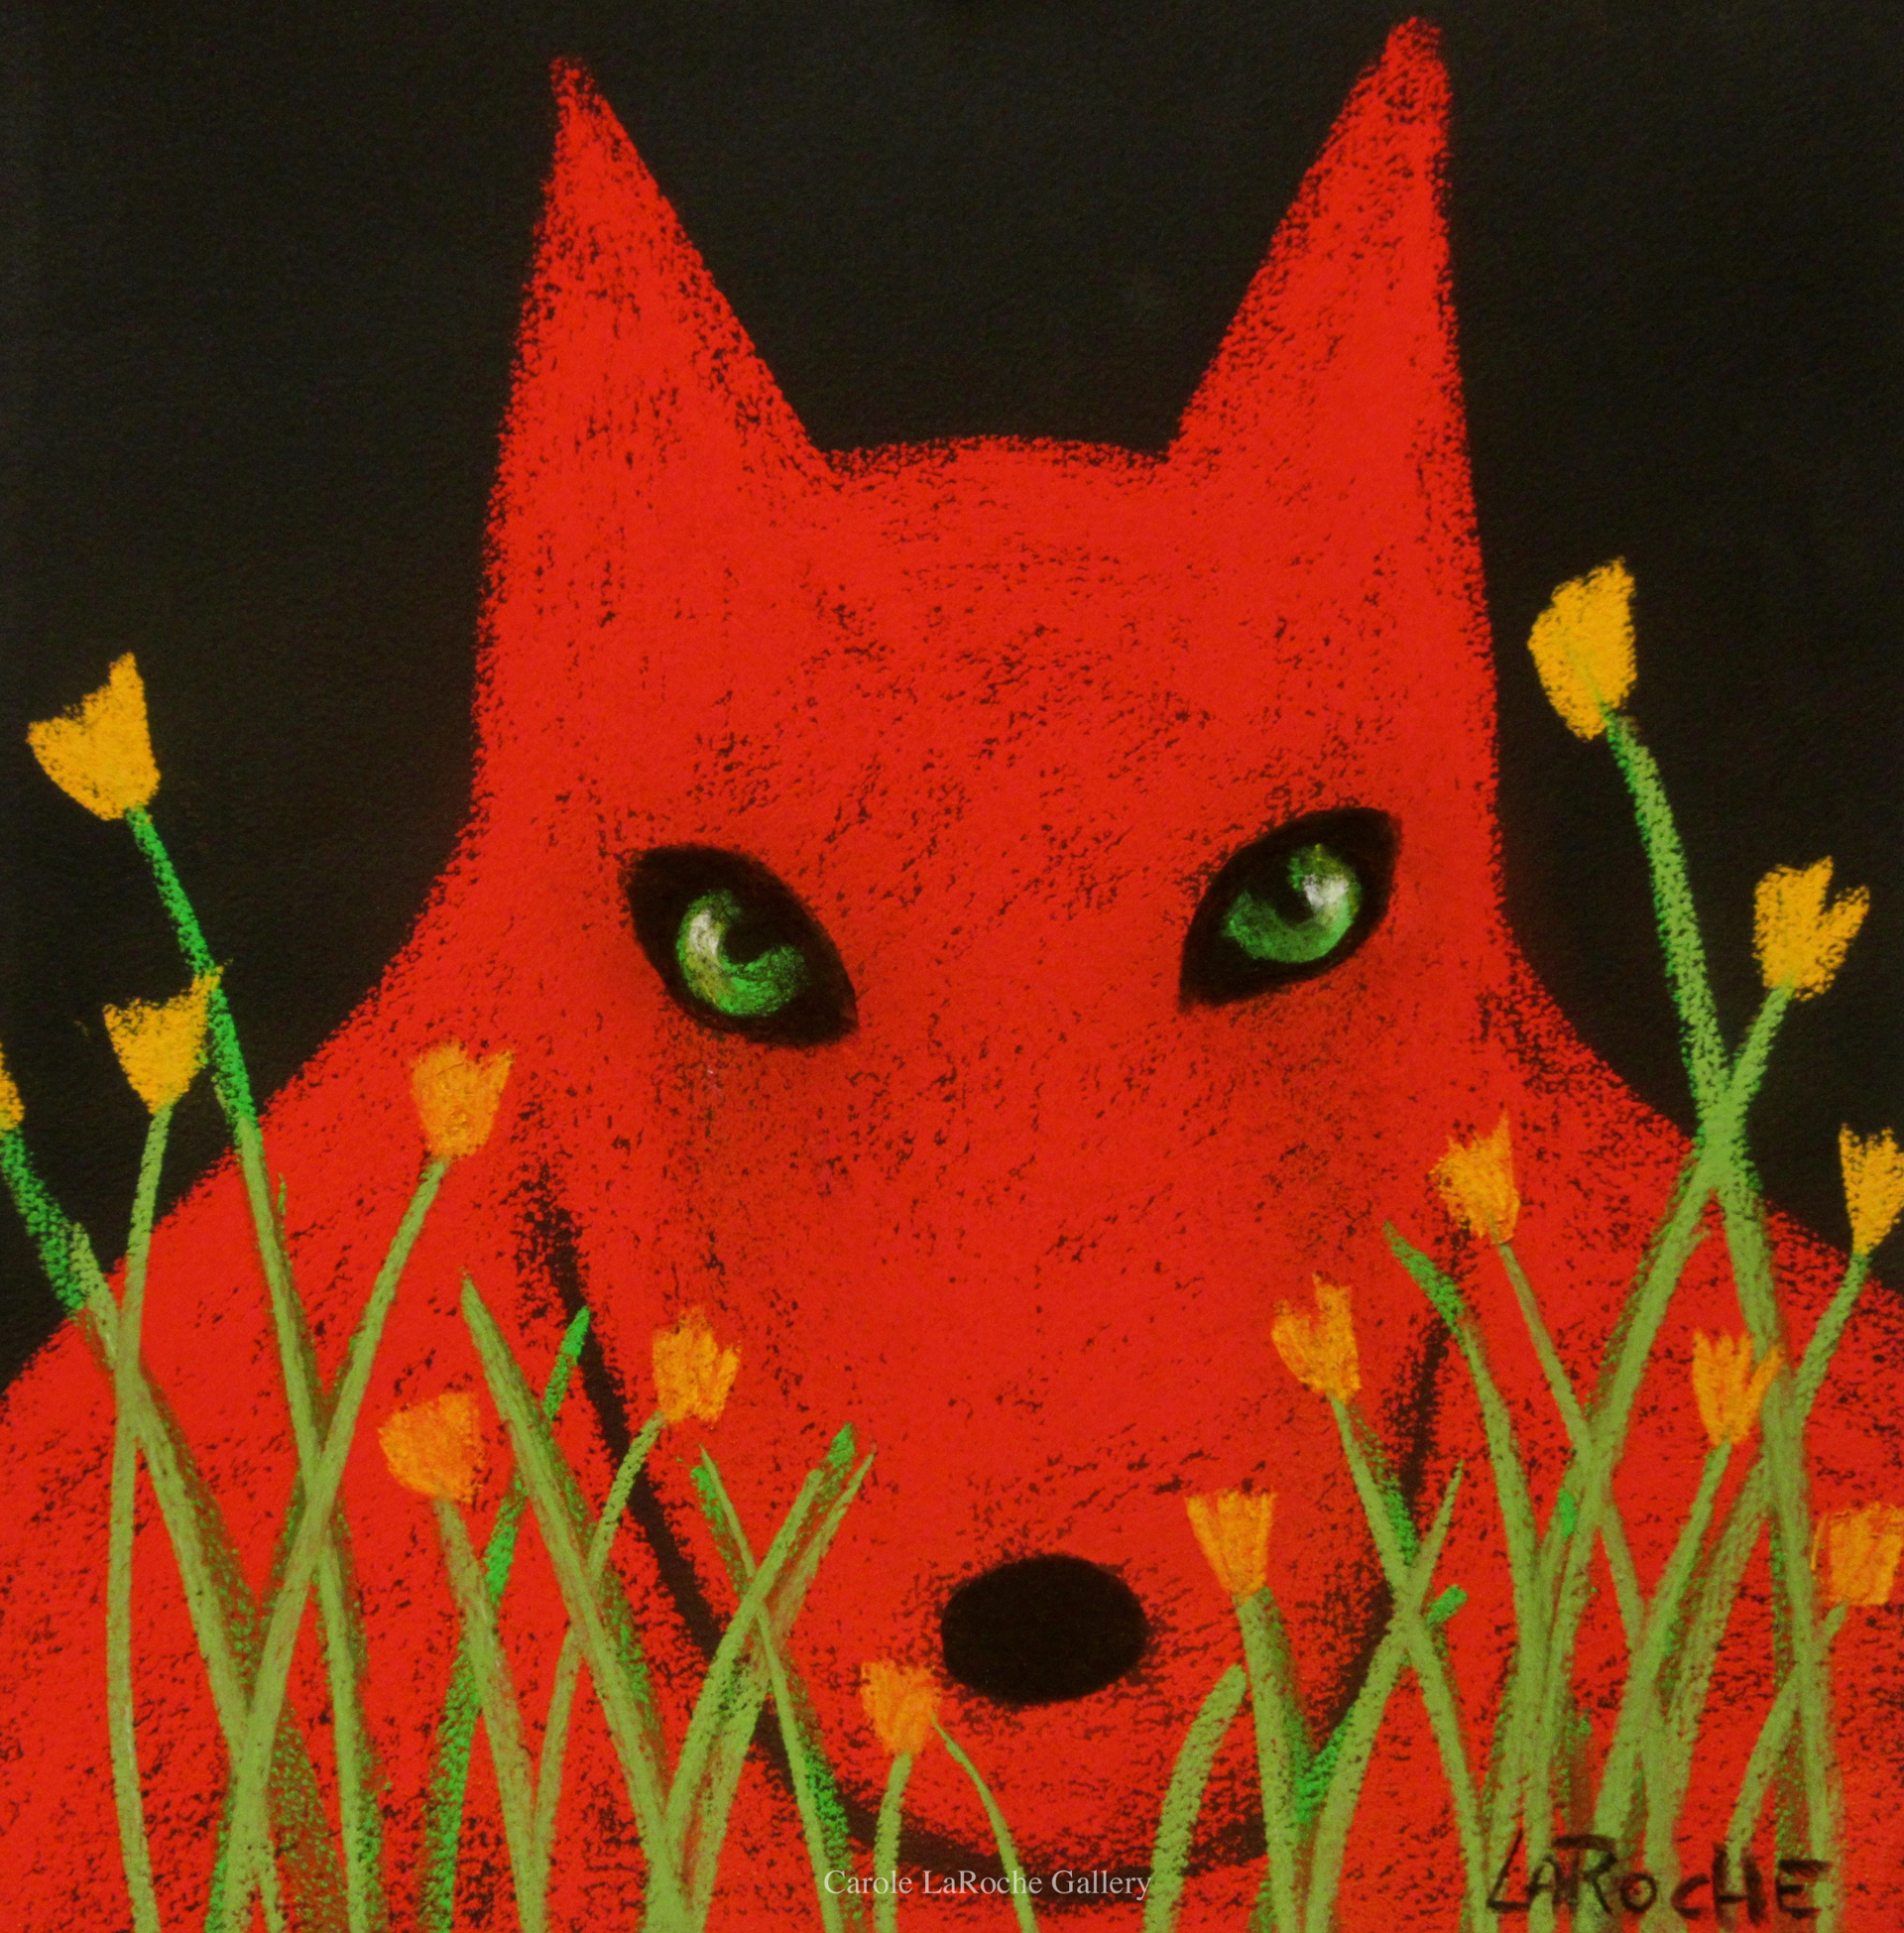 WOLF IN THE GARDEN - limited edition giclee on canvas 20"x20"   by Carole LaRoche